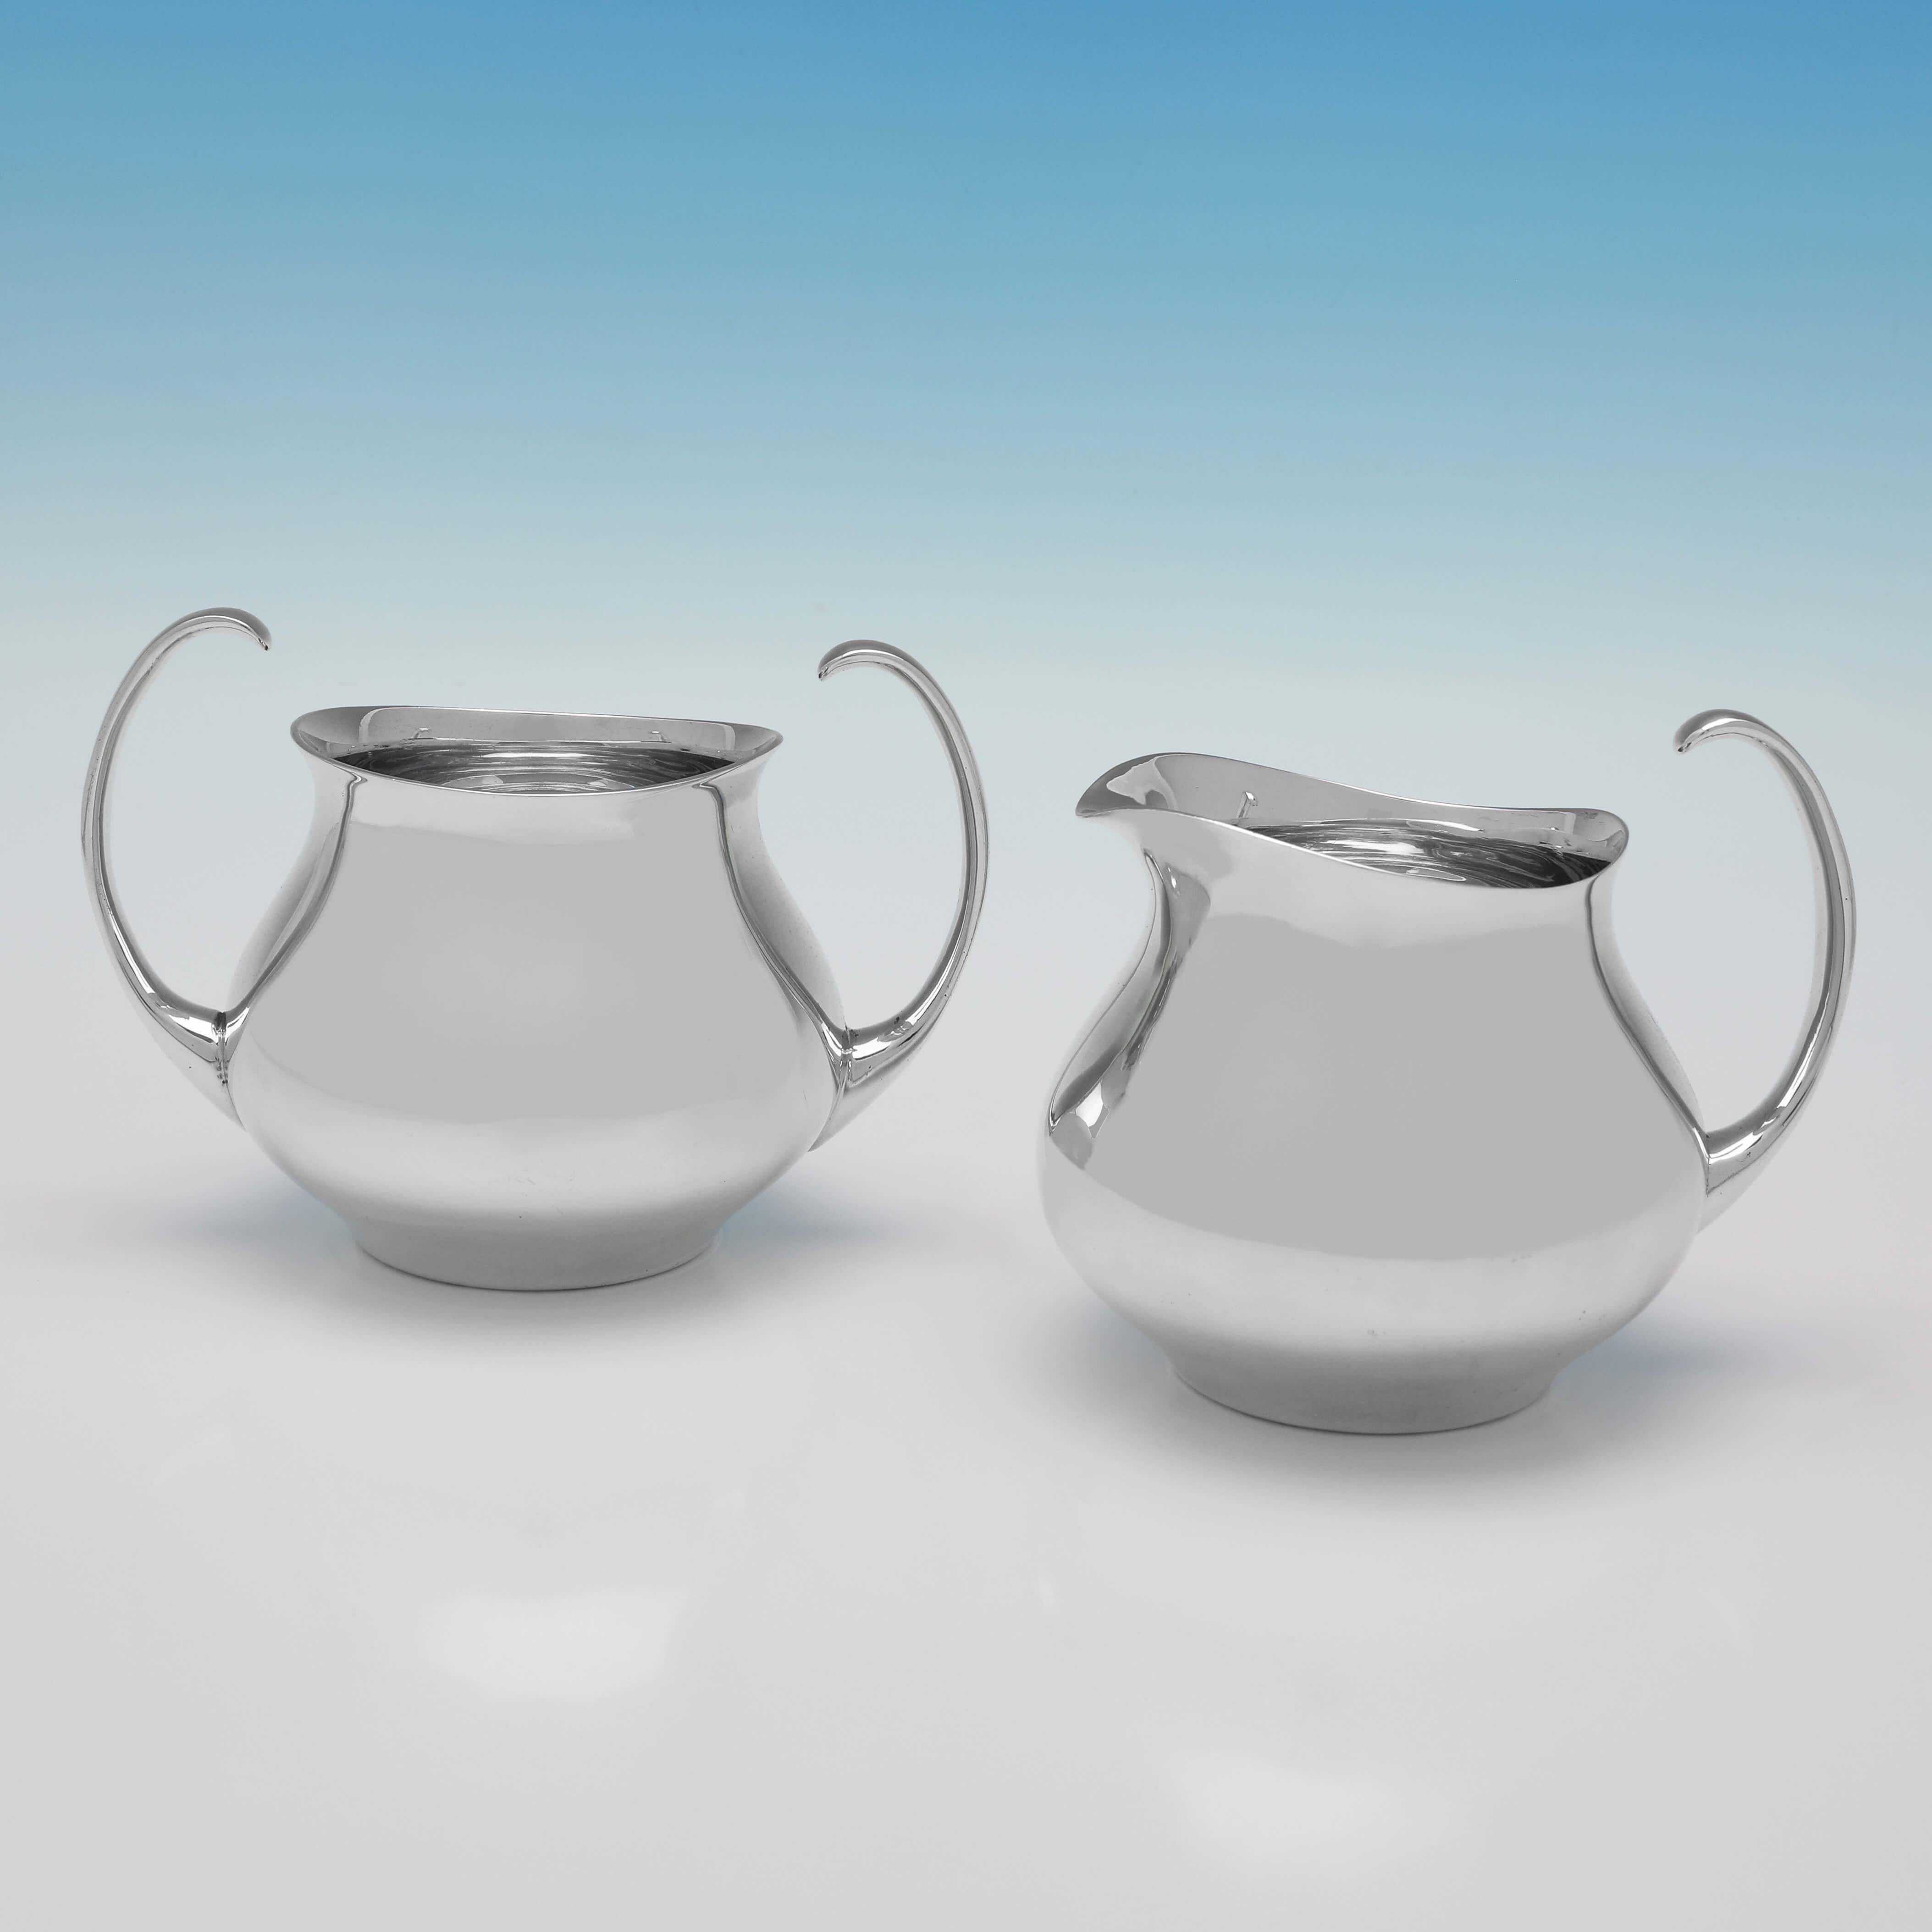 Mid-20th Century Clements Tea Service, Sterling Silver, 1964, Scandinavian Modern Design For Sale